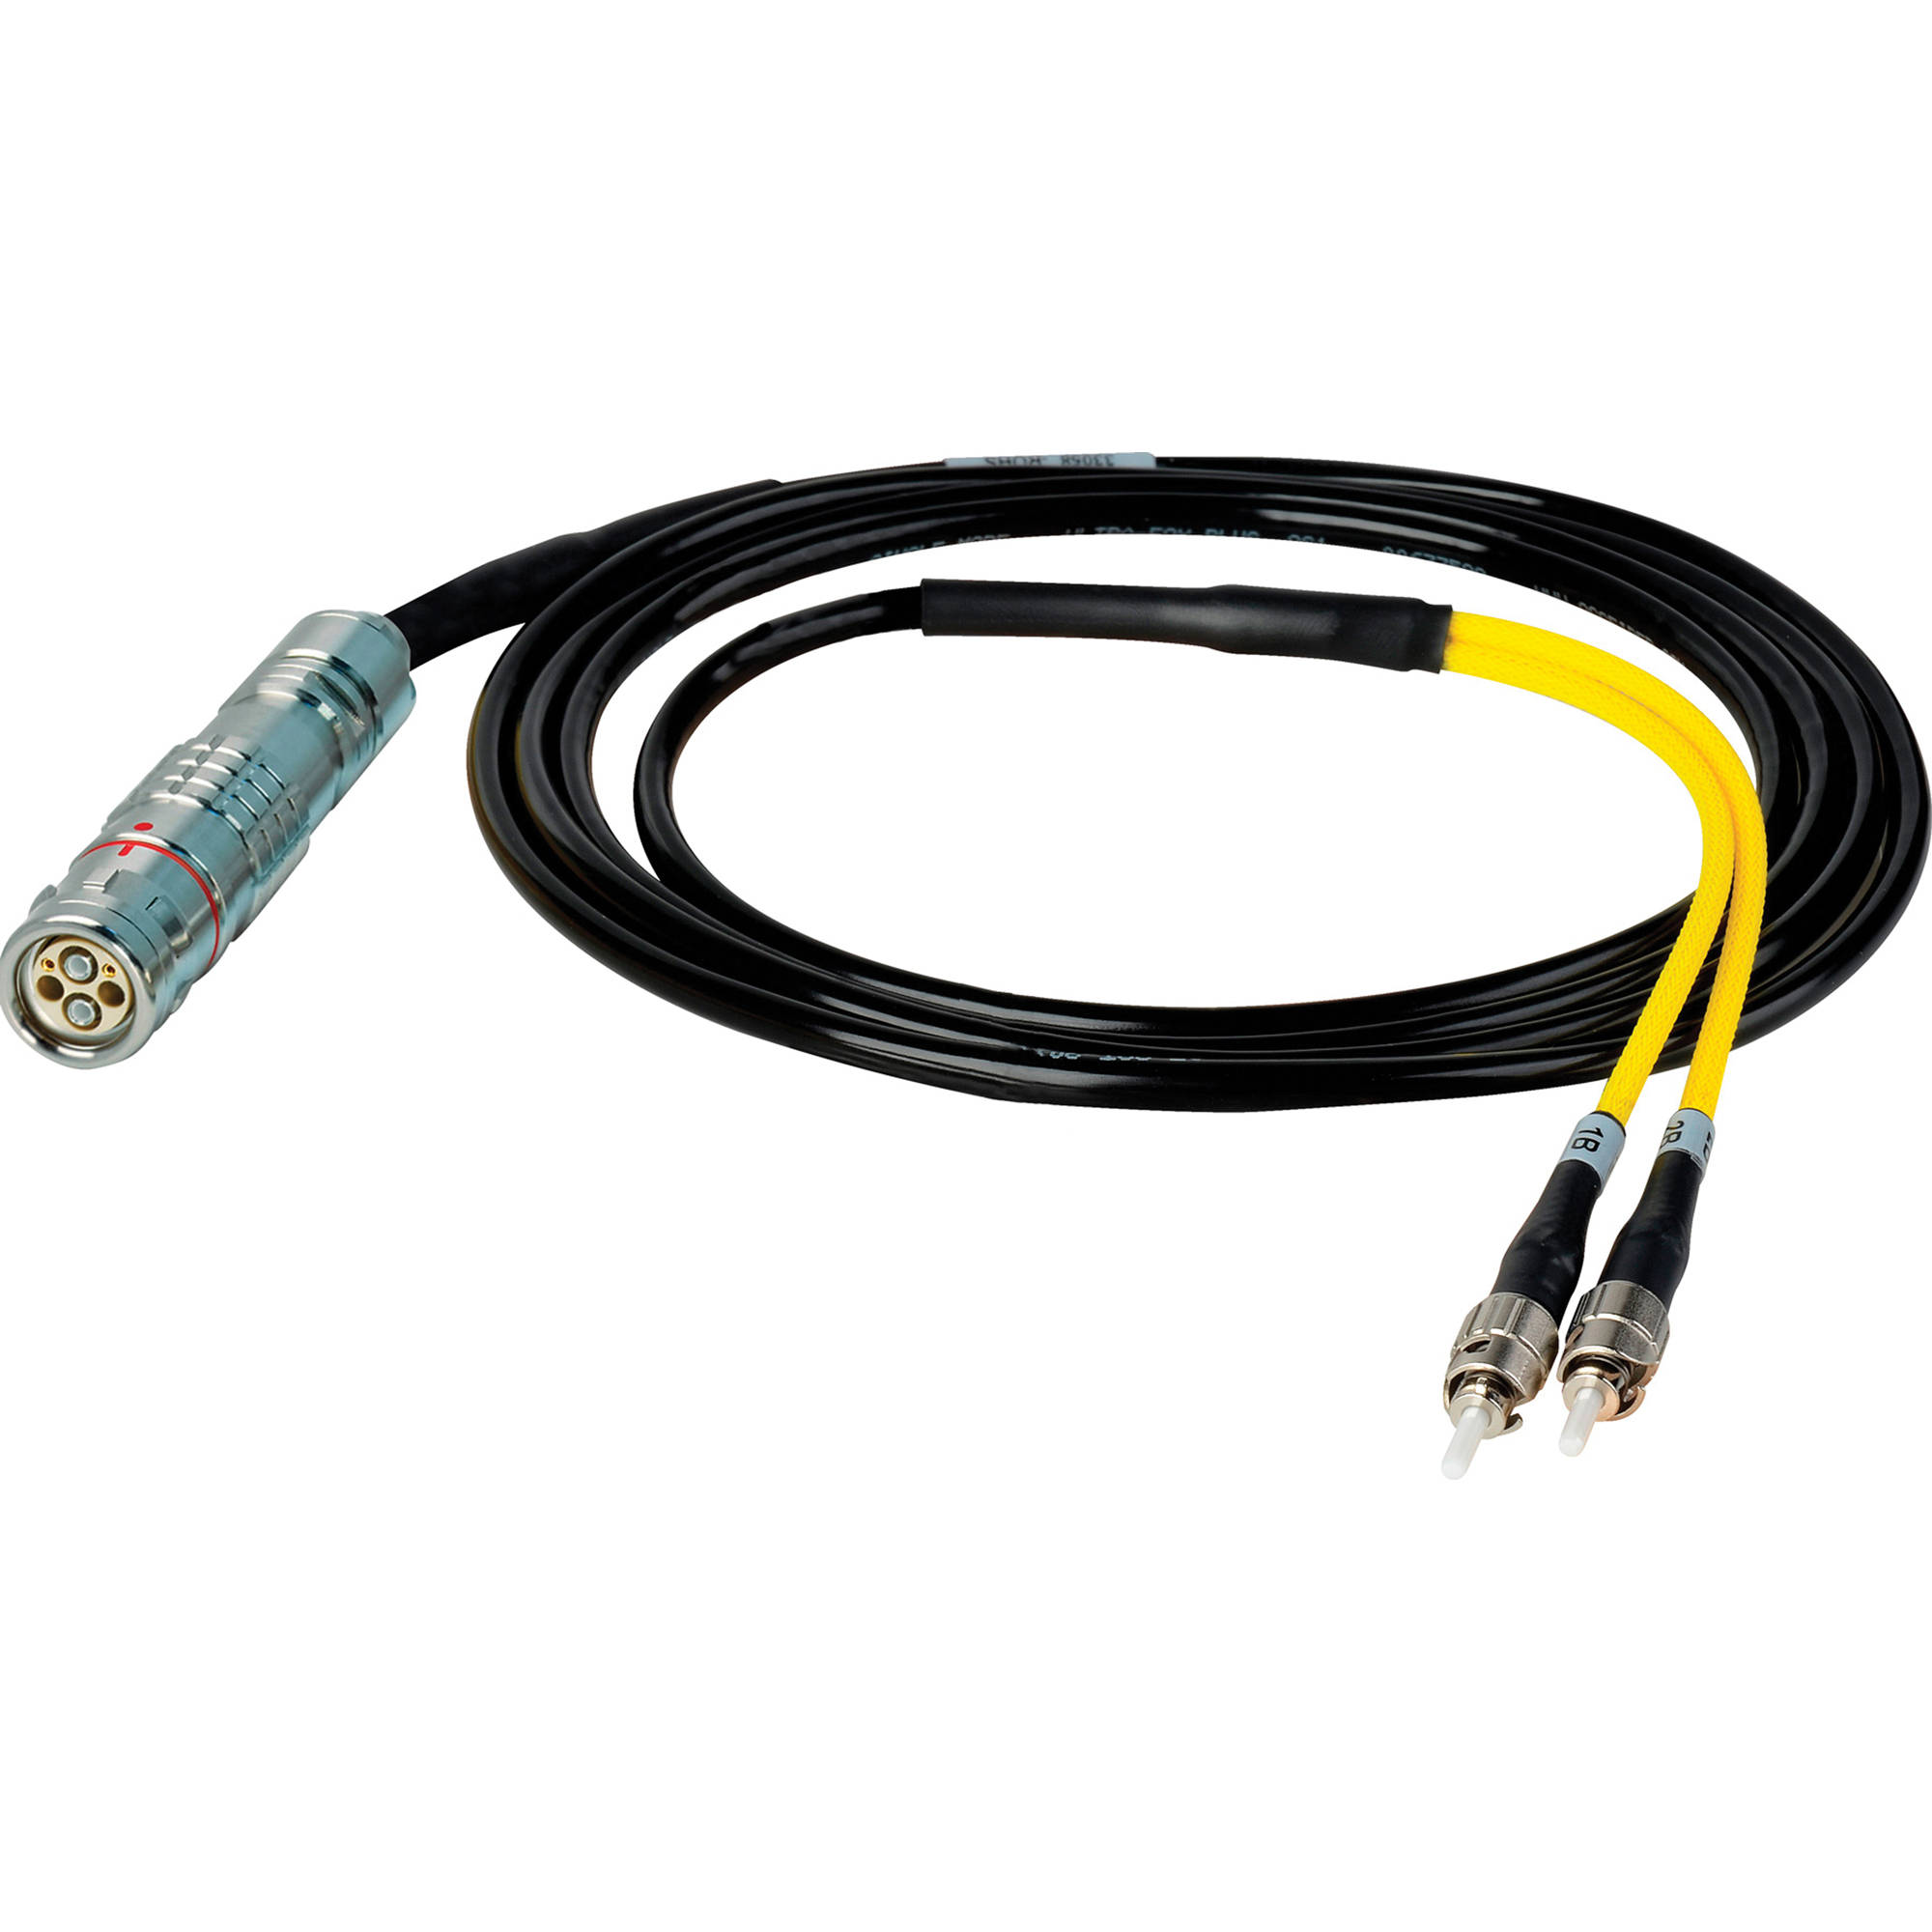 Camplex LEMO FUW to Dual ST In-Line Fiber Optic Breakout Cable - 15 Foot